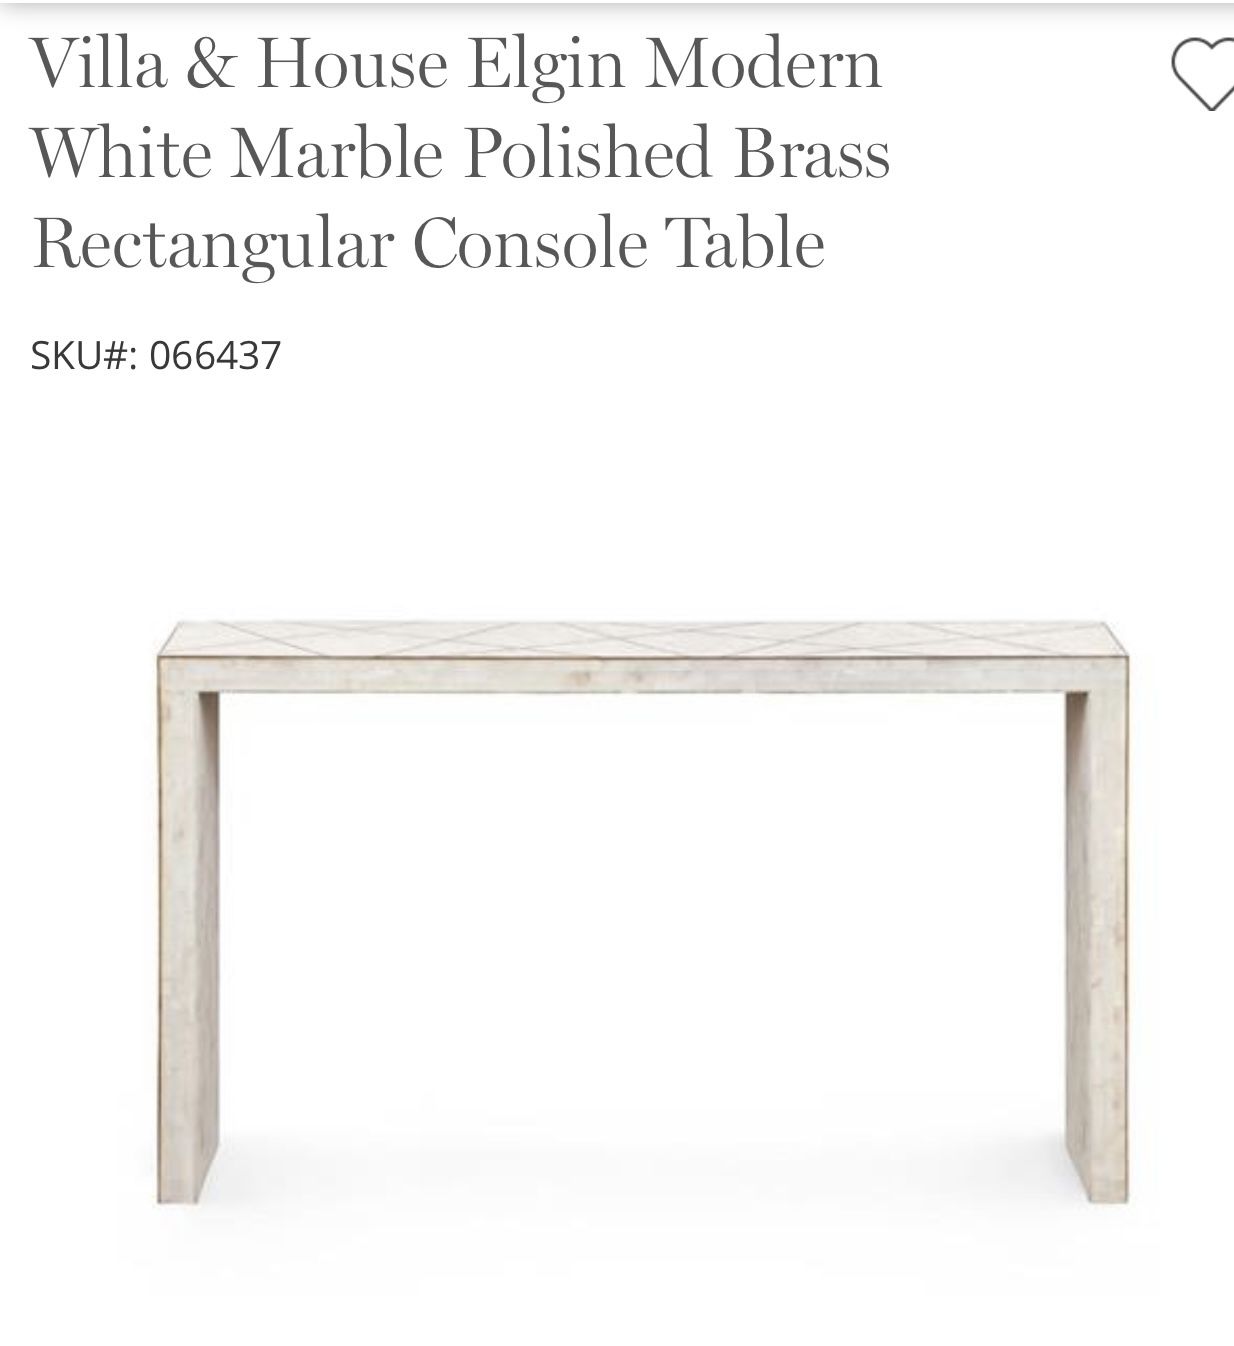 Villa & House Elgin Modern White Marble Polished Brass Rectangular Console Table